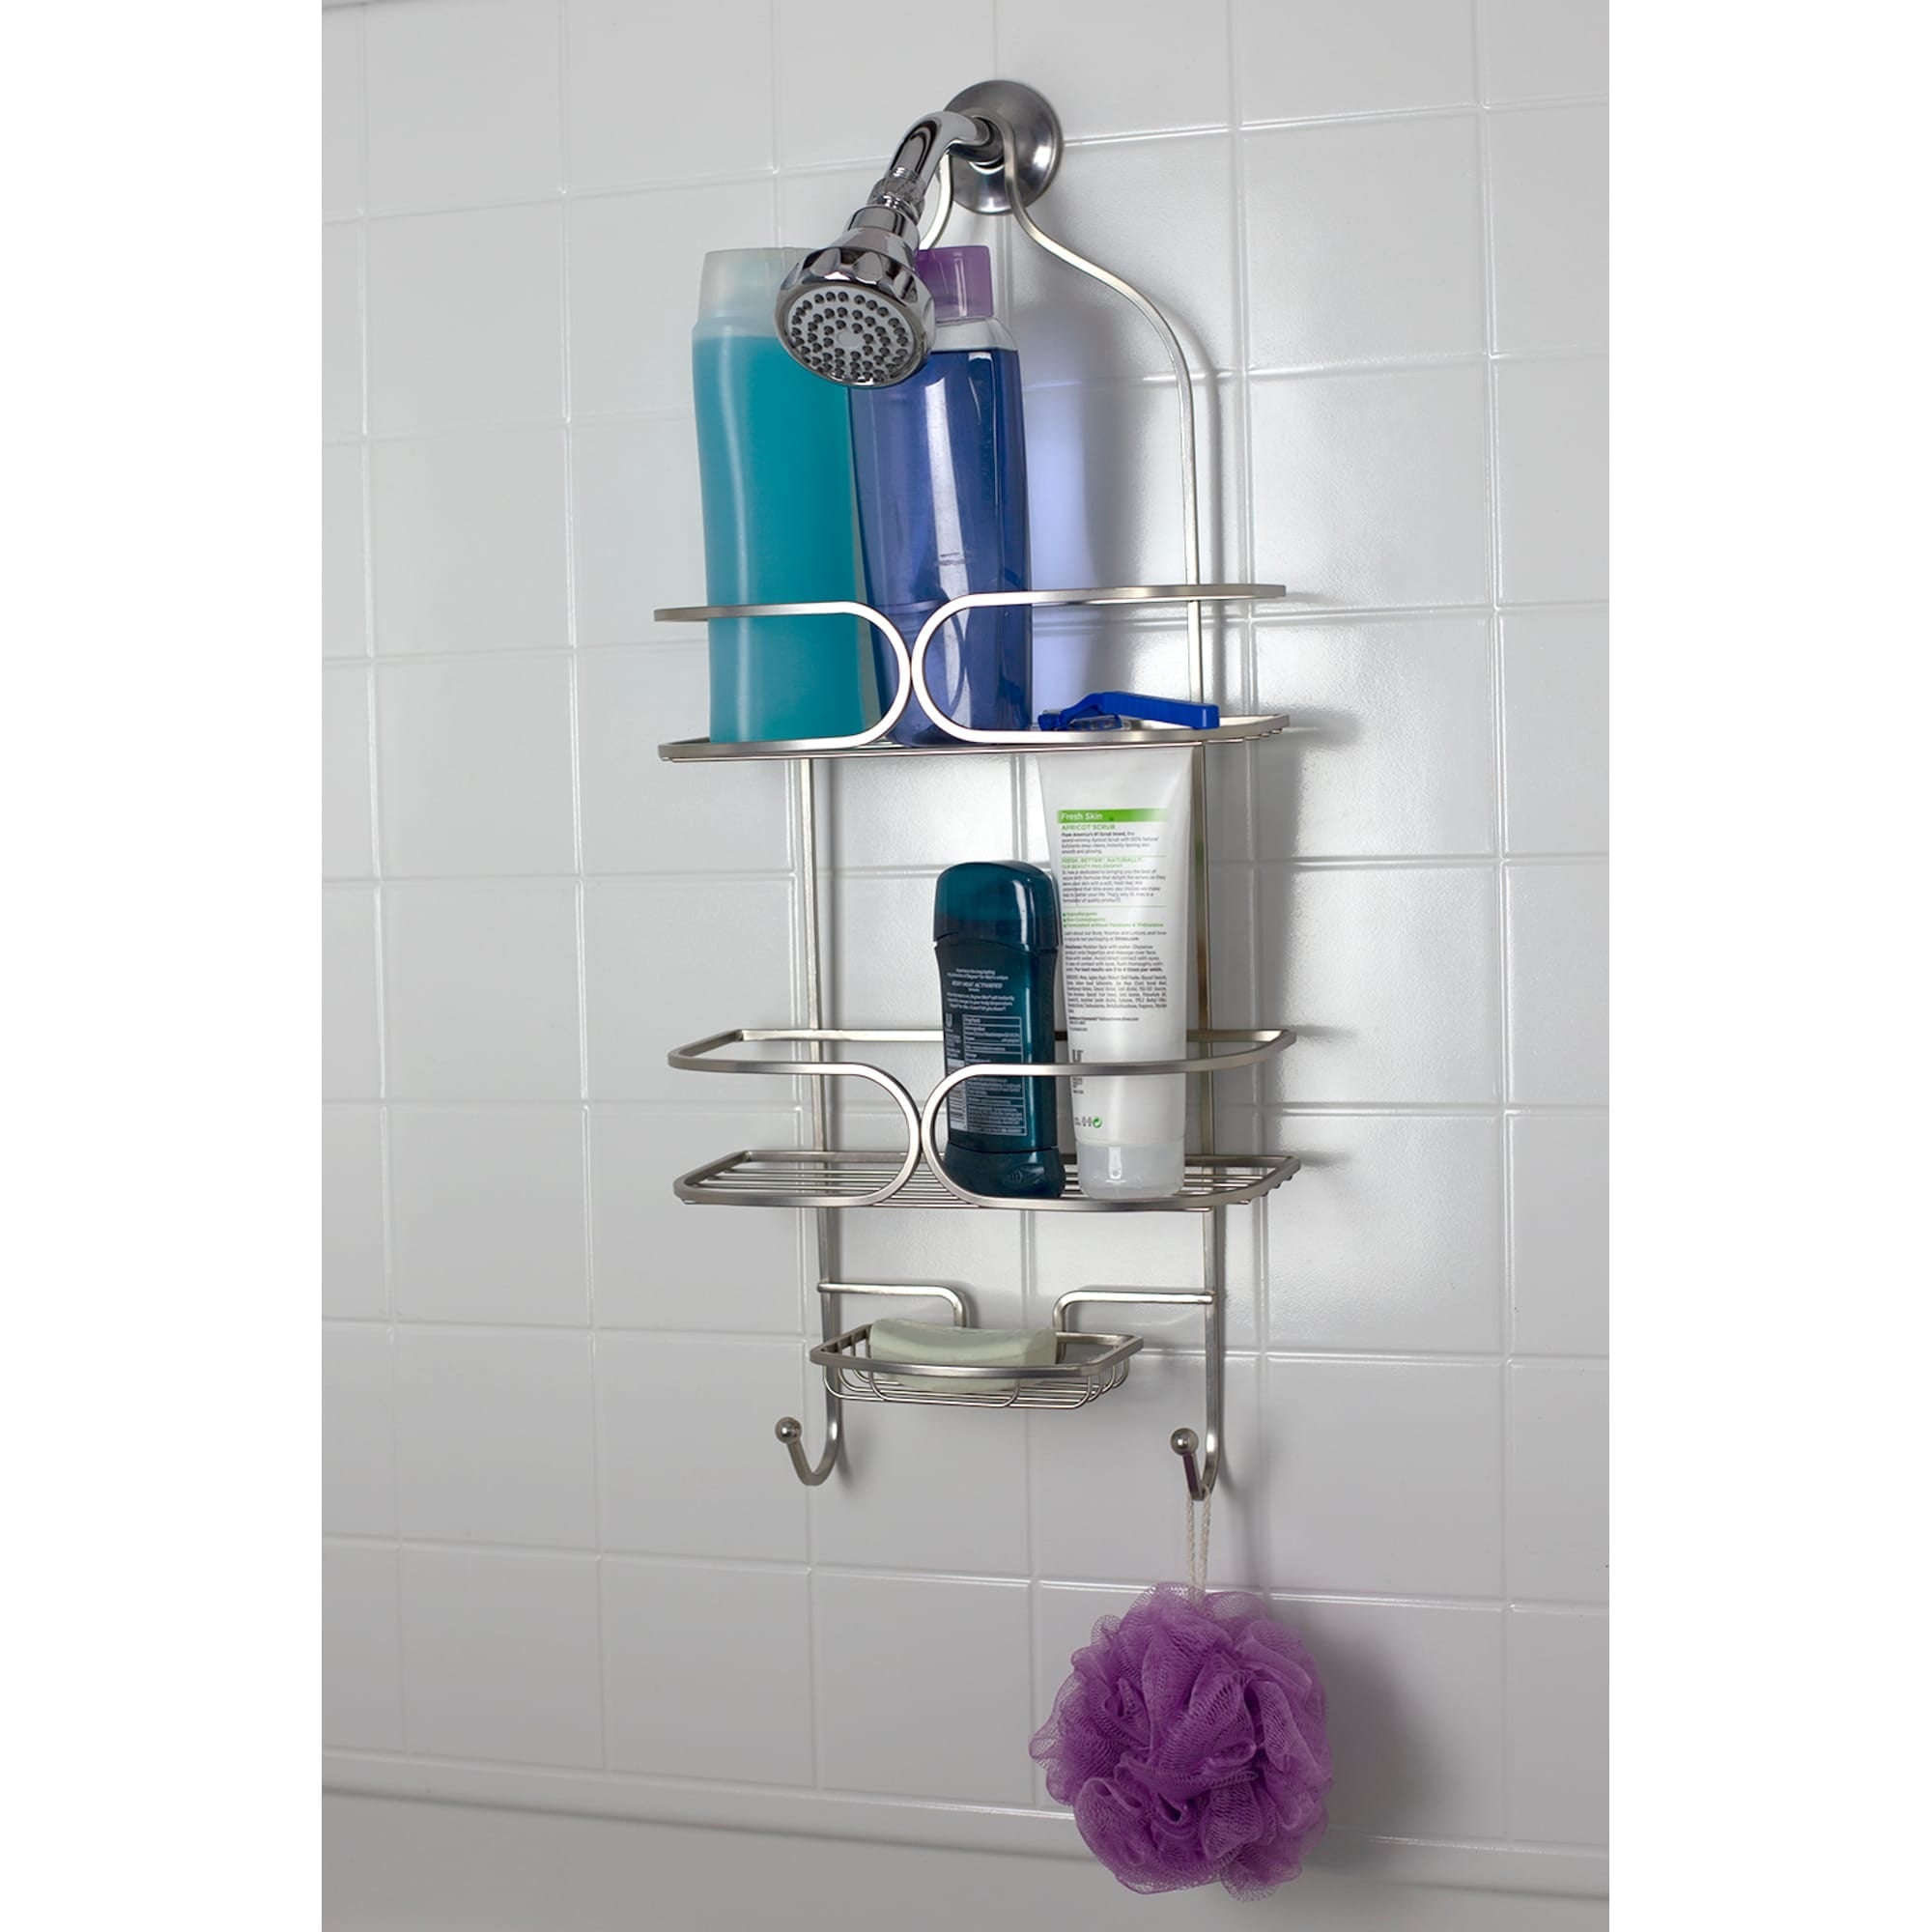 Home Basics Essence Shower Caddy, Satin Nickel $15.00 EACH, CASE PACK OF 6